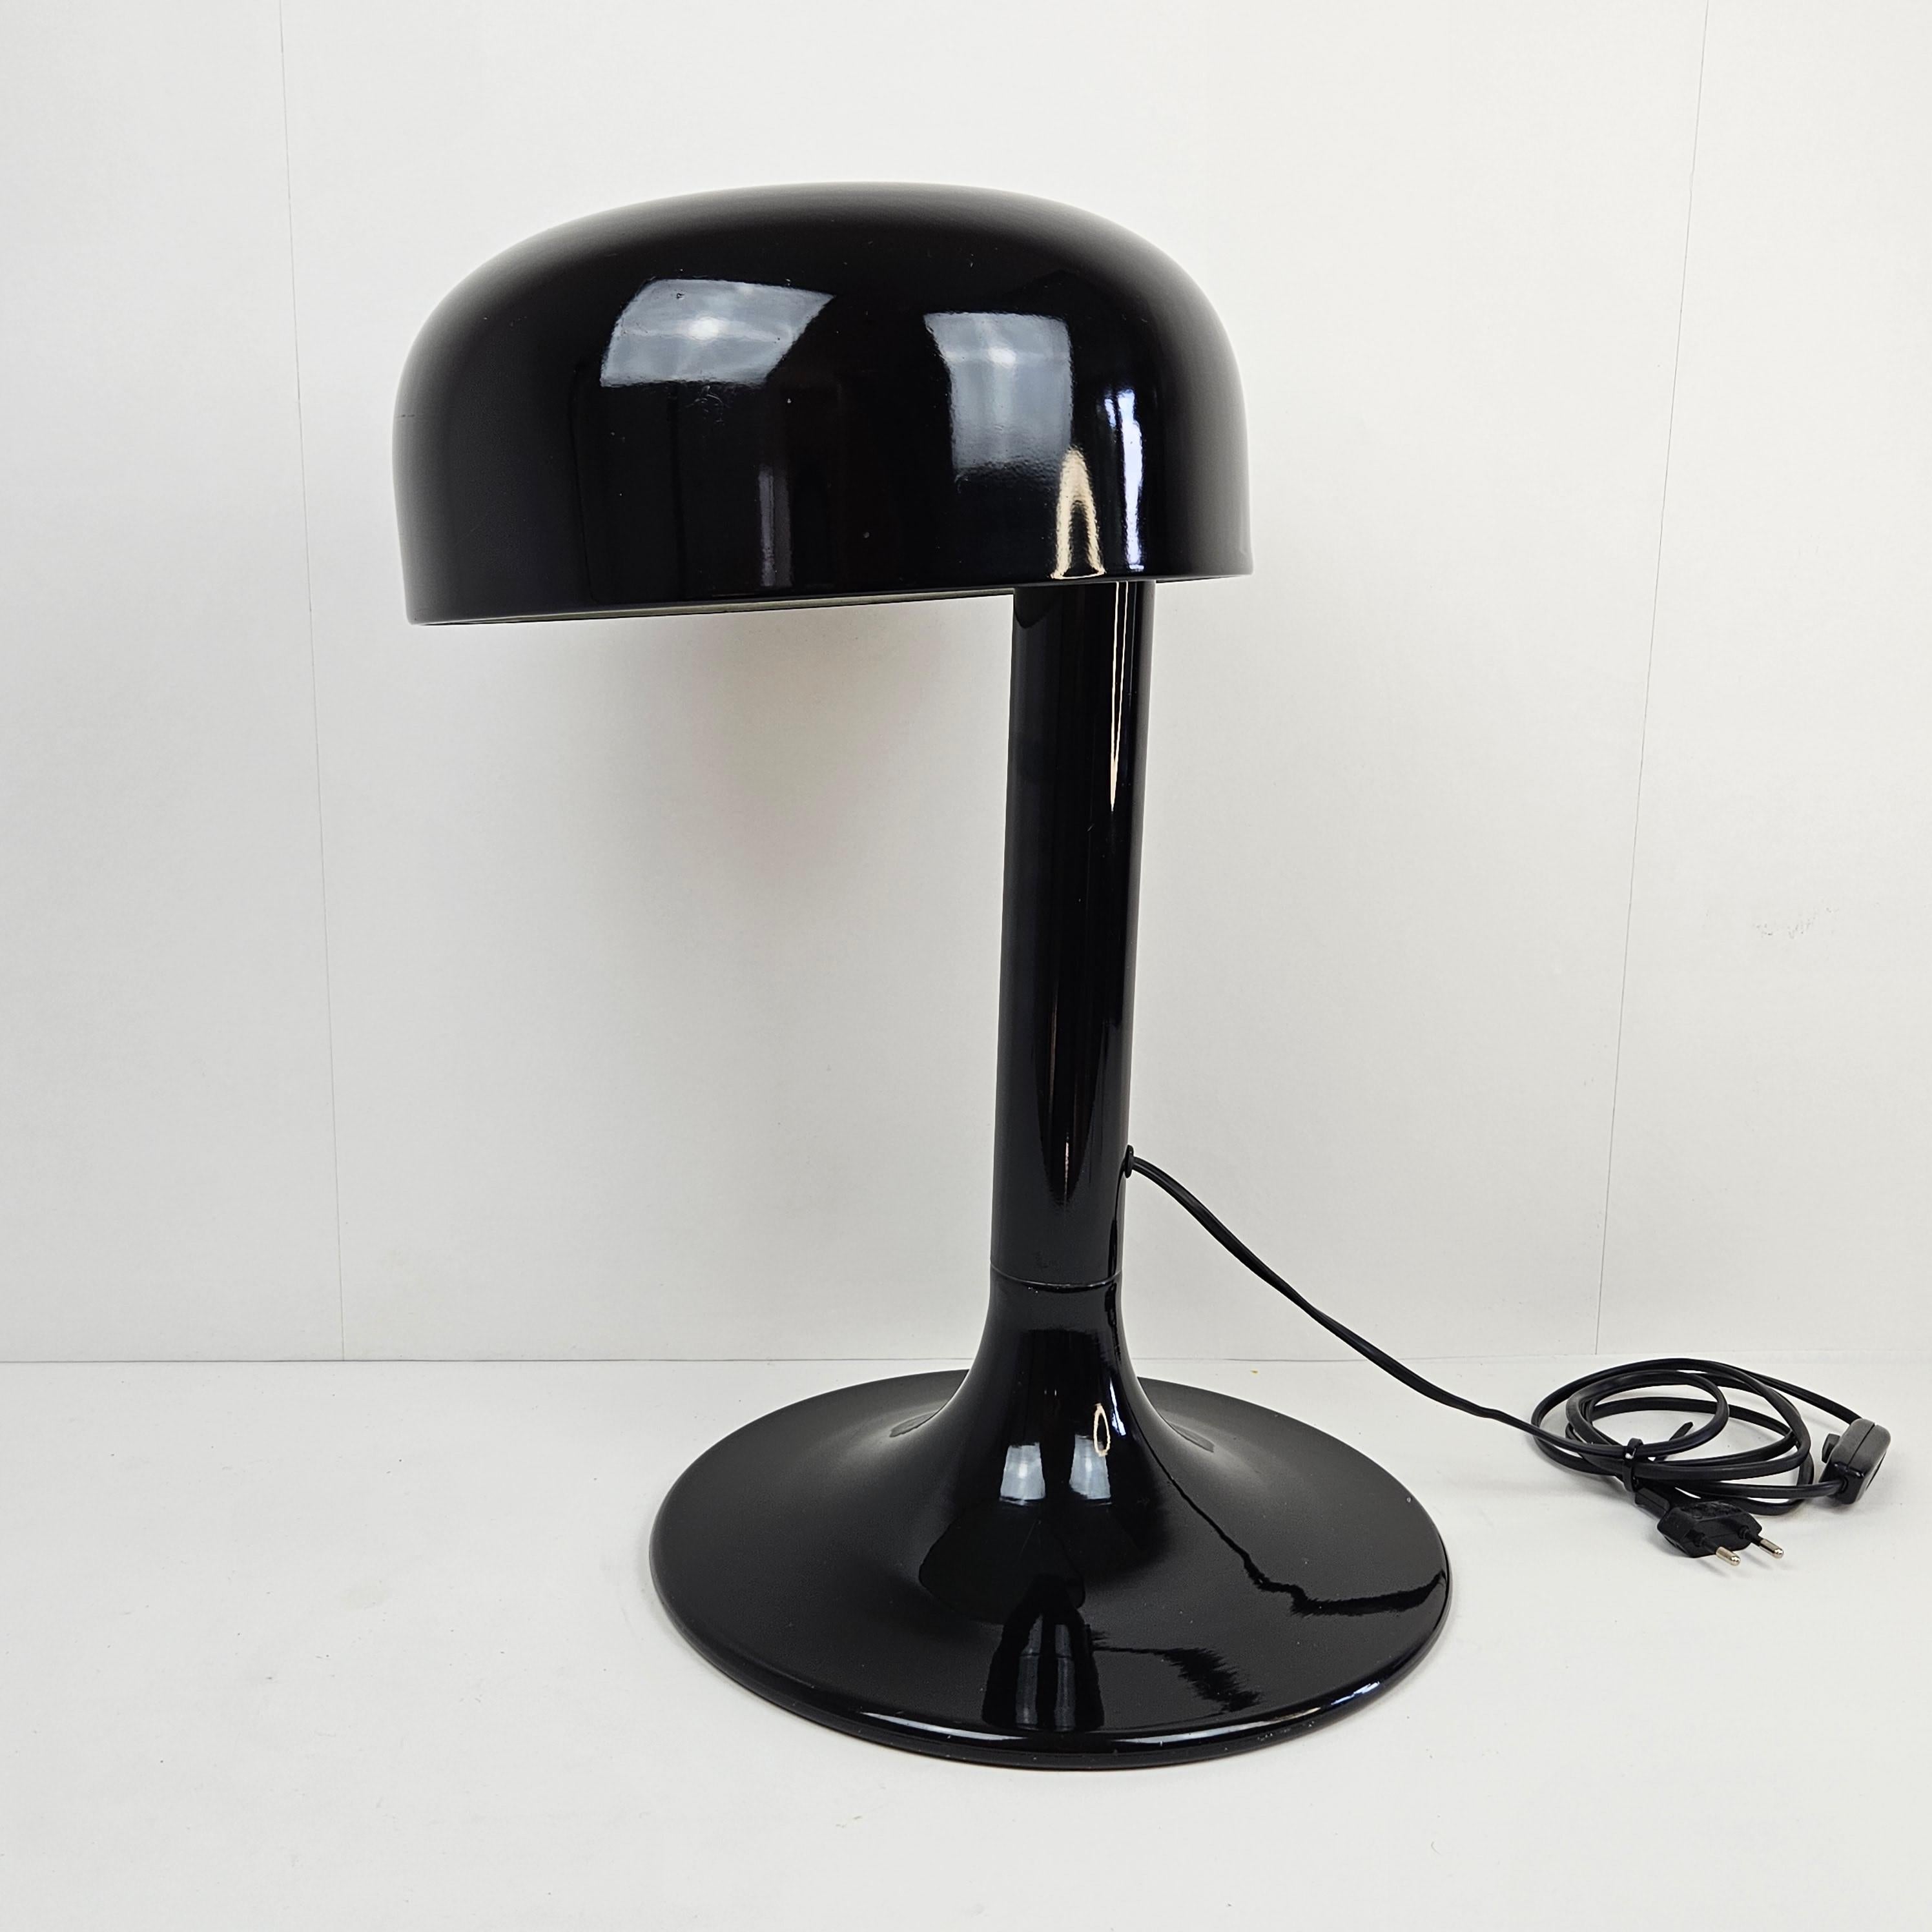 Very rare model 3105 Table Lamp by Stilnovo.
The name of the lamp is 